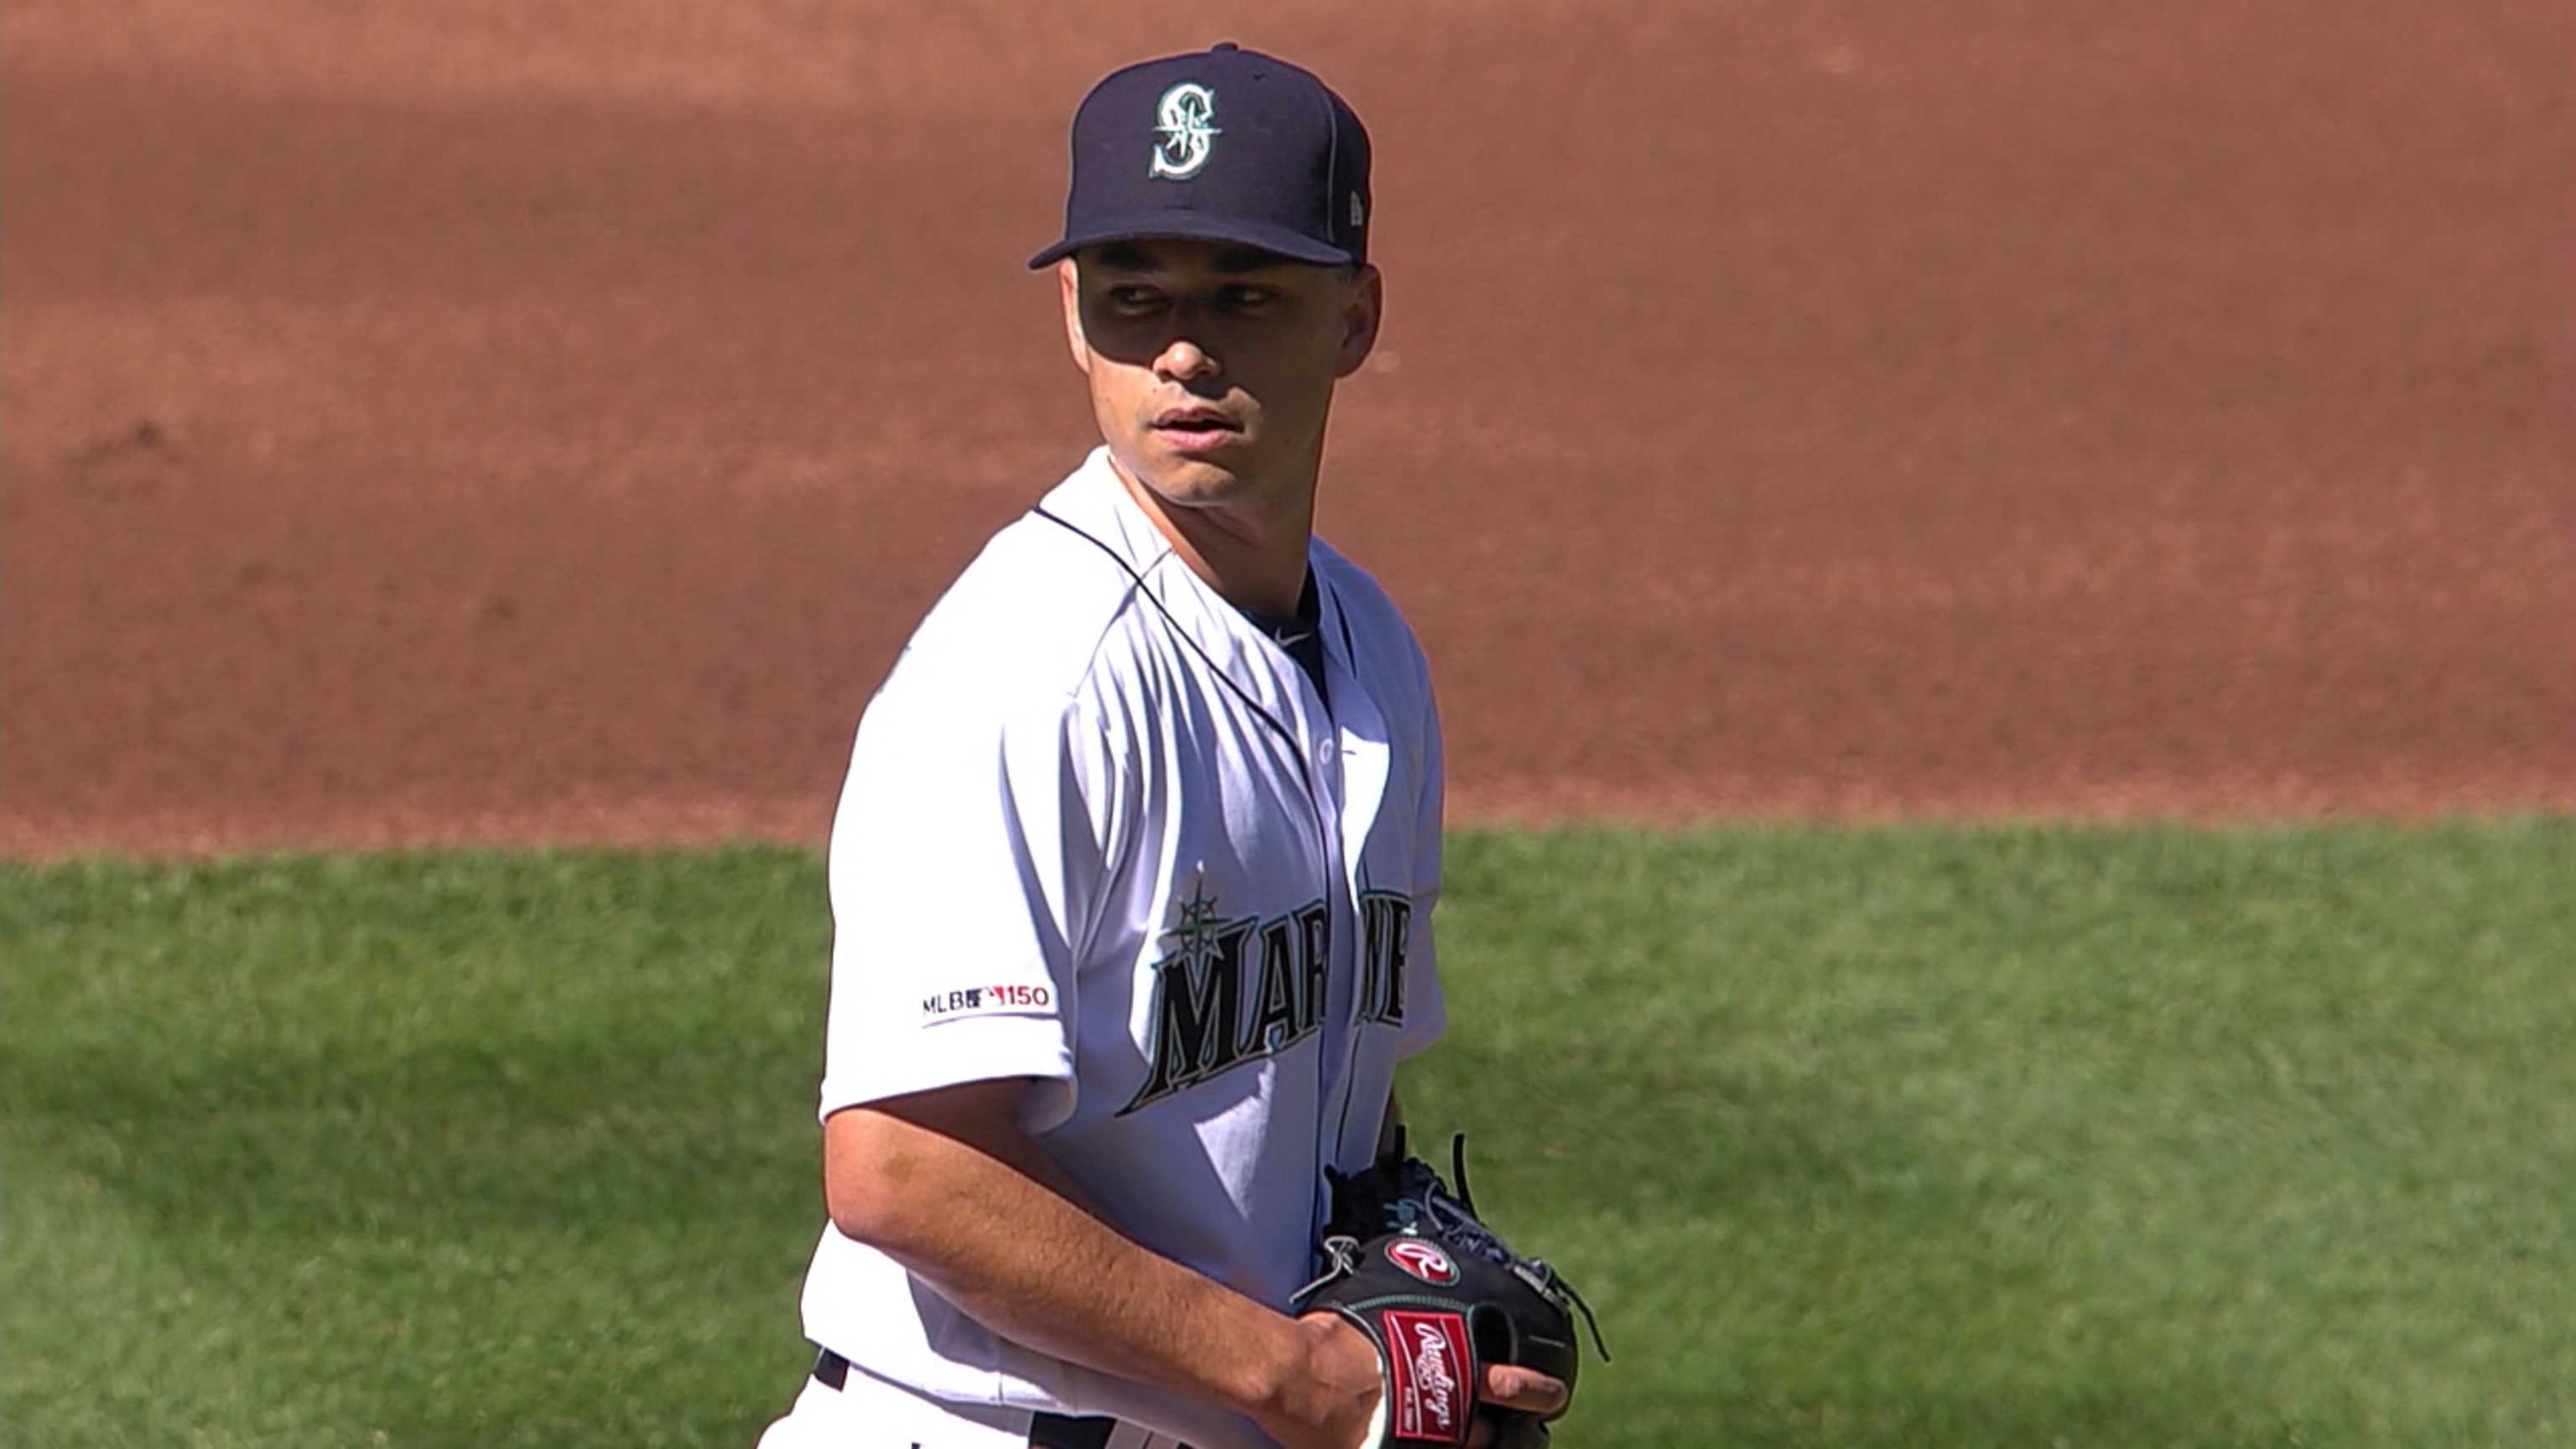 Marco Gonzales ready to become leader for Mariners